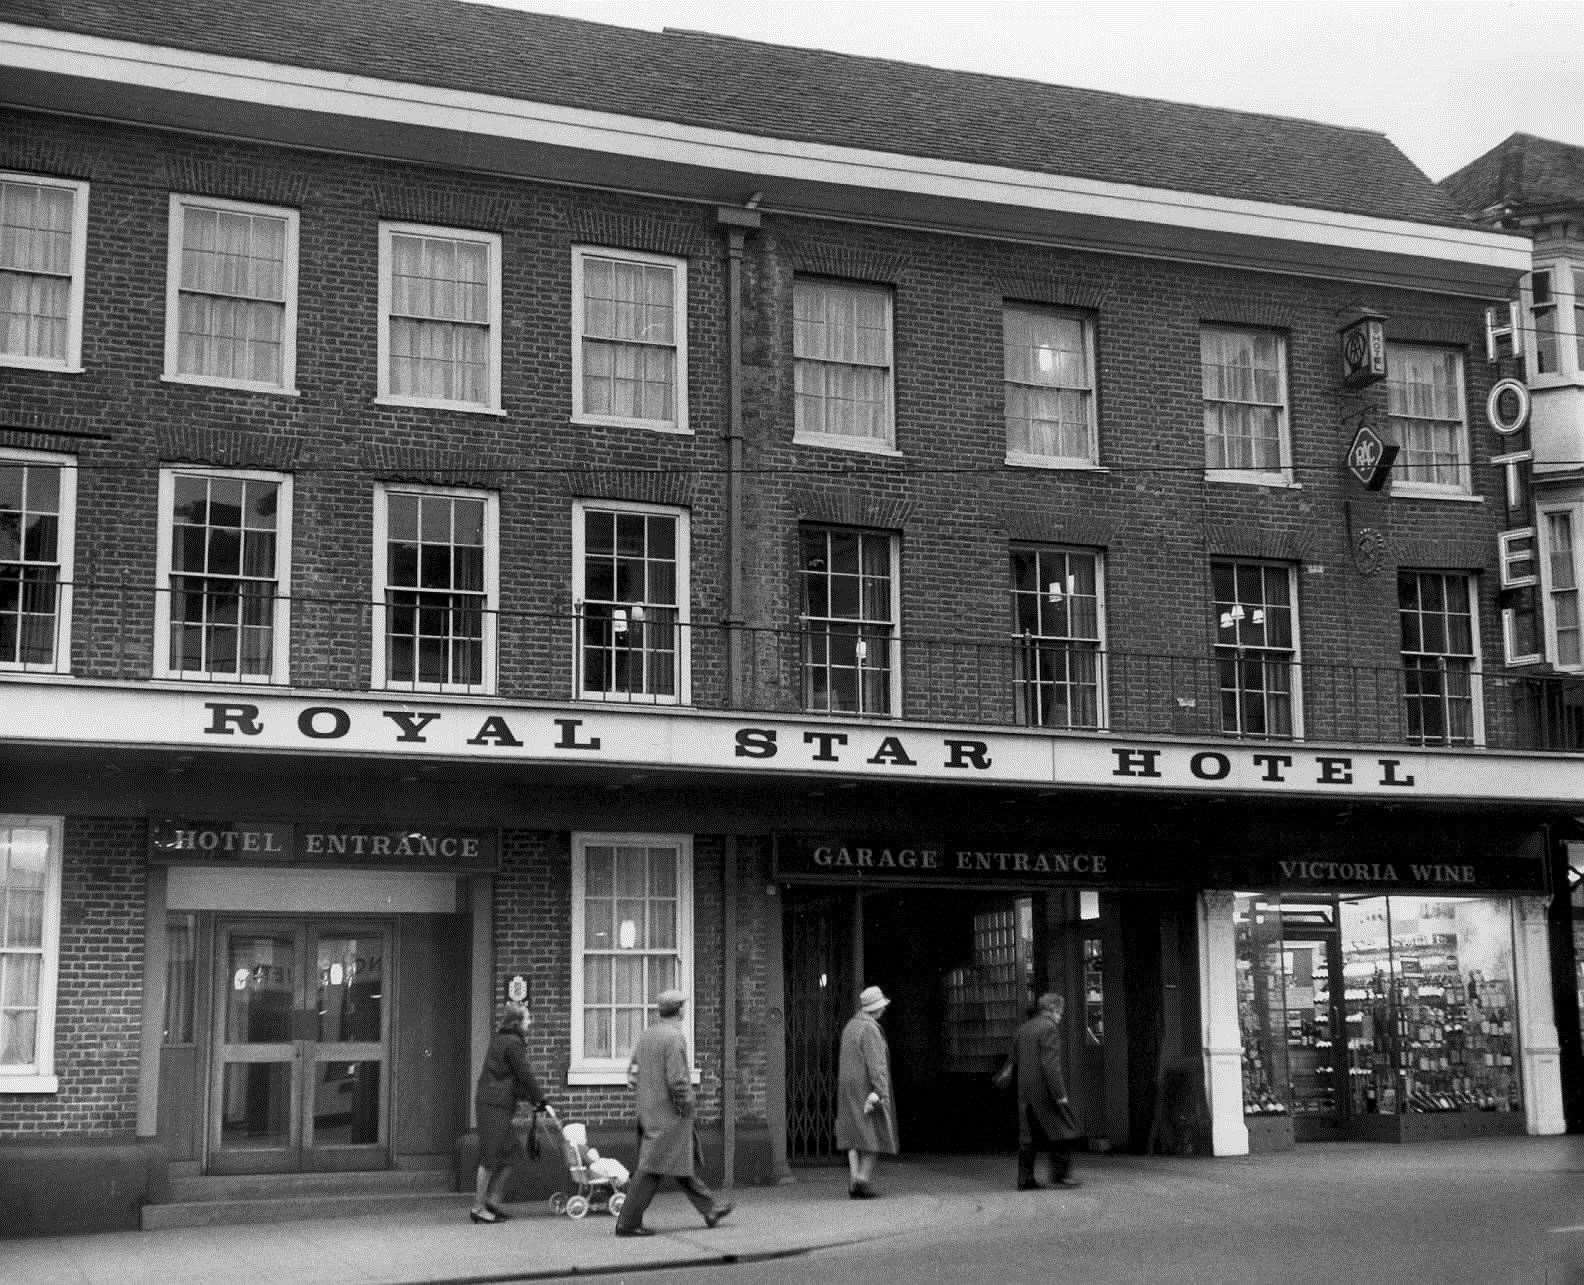 The Royal Star Hotel in King Street, Maidstone, hosted many famous names in the 50s and 60s